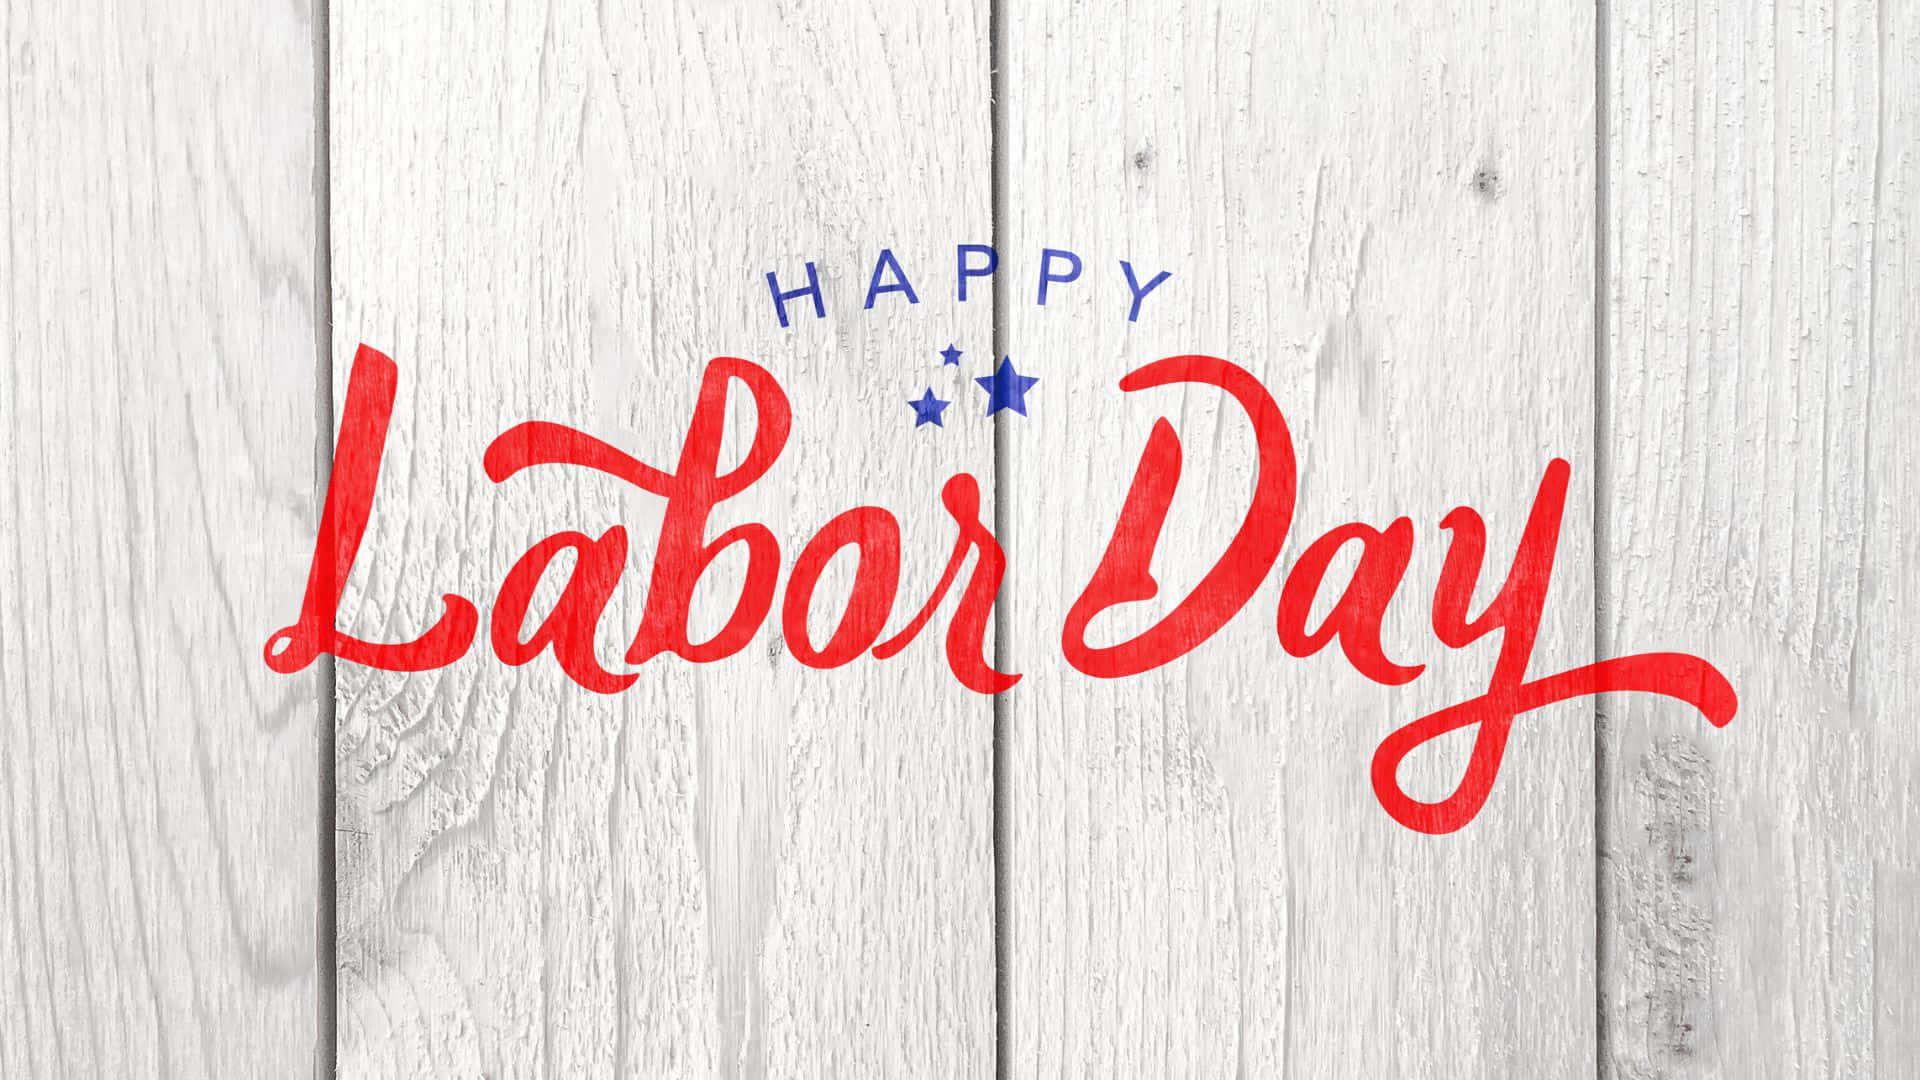 Celebrating Labor Day with pride and patriotism